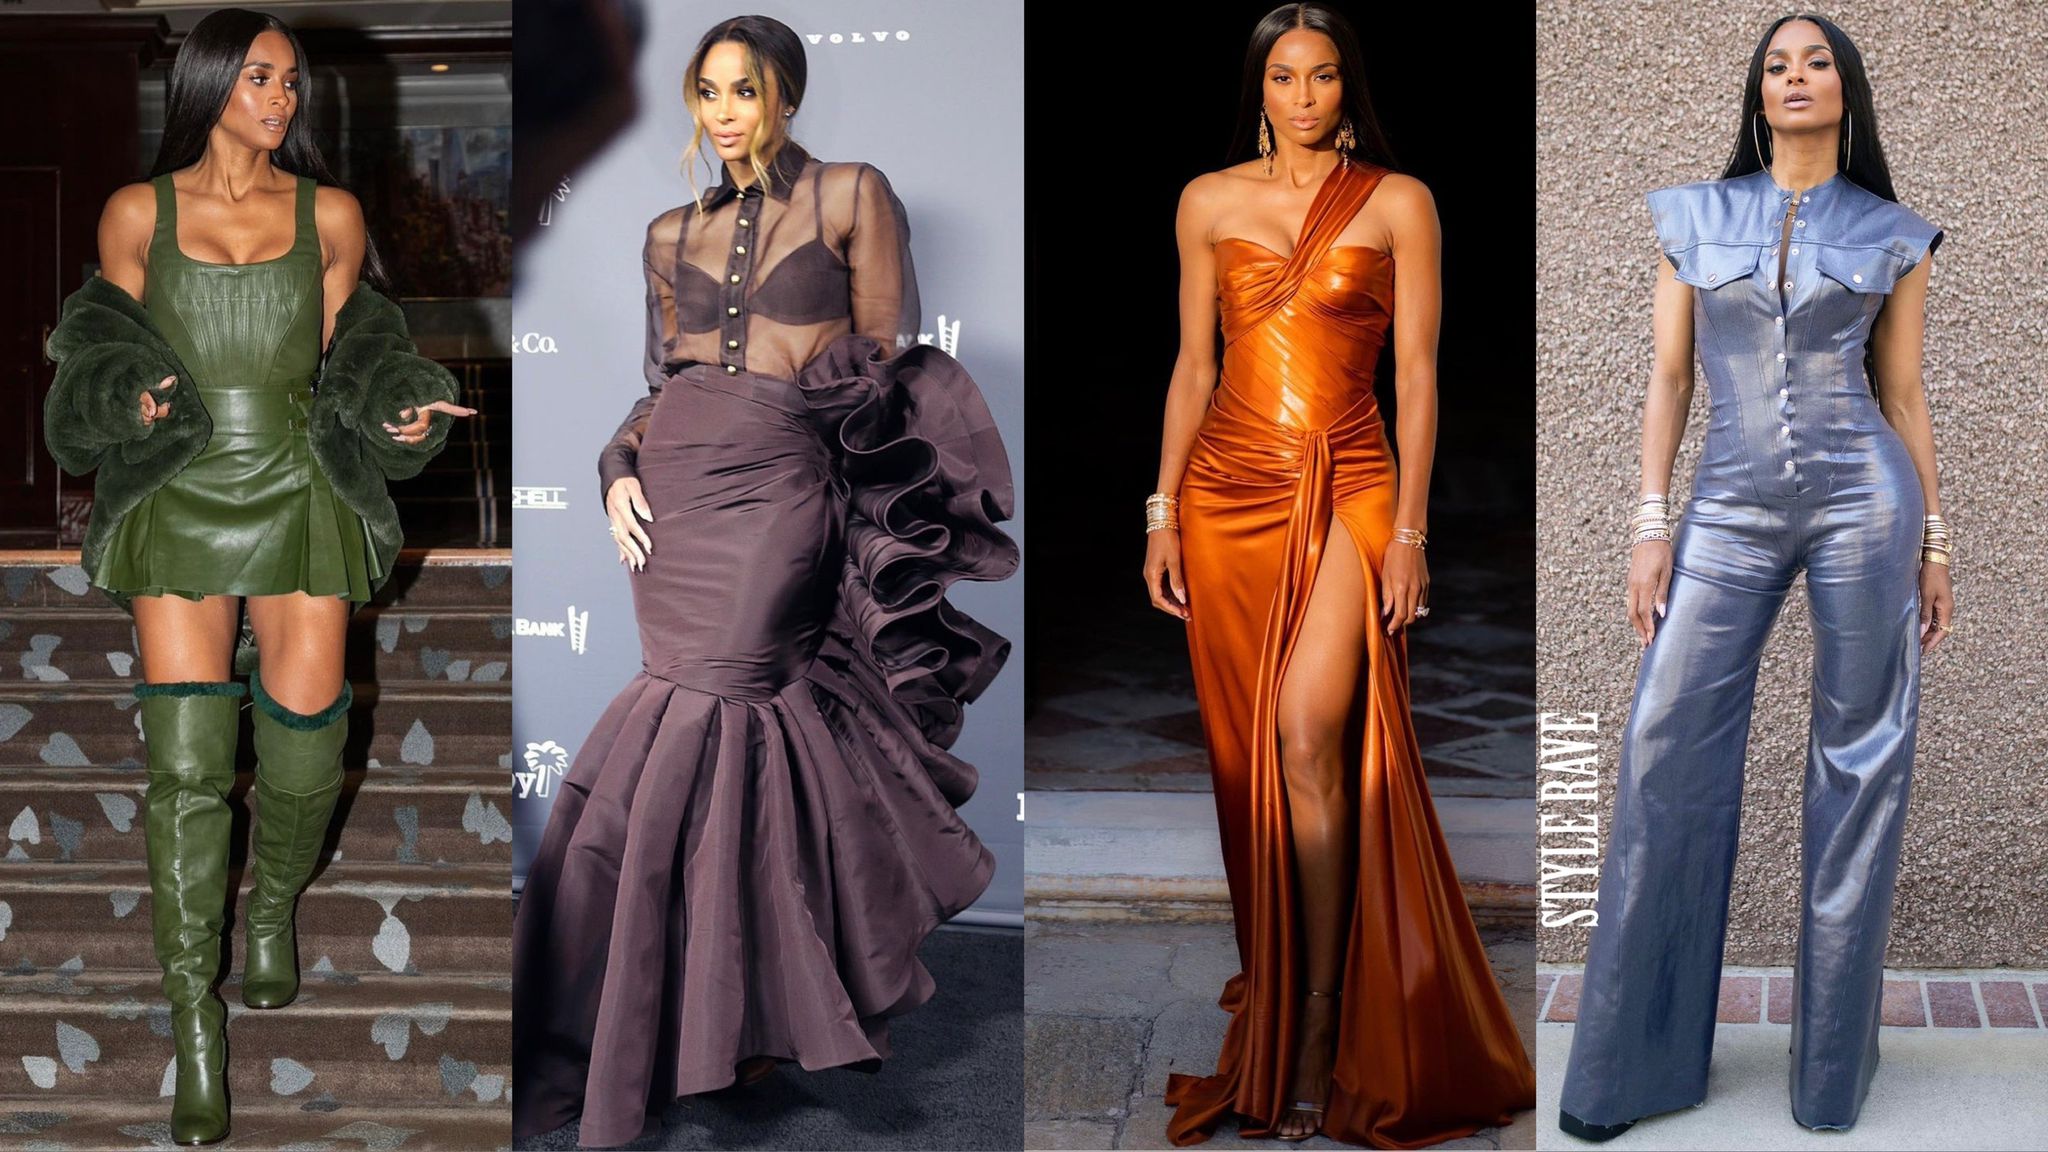 birthday-girl-ciara-poses-in-outfits-fashion-style